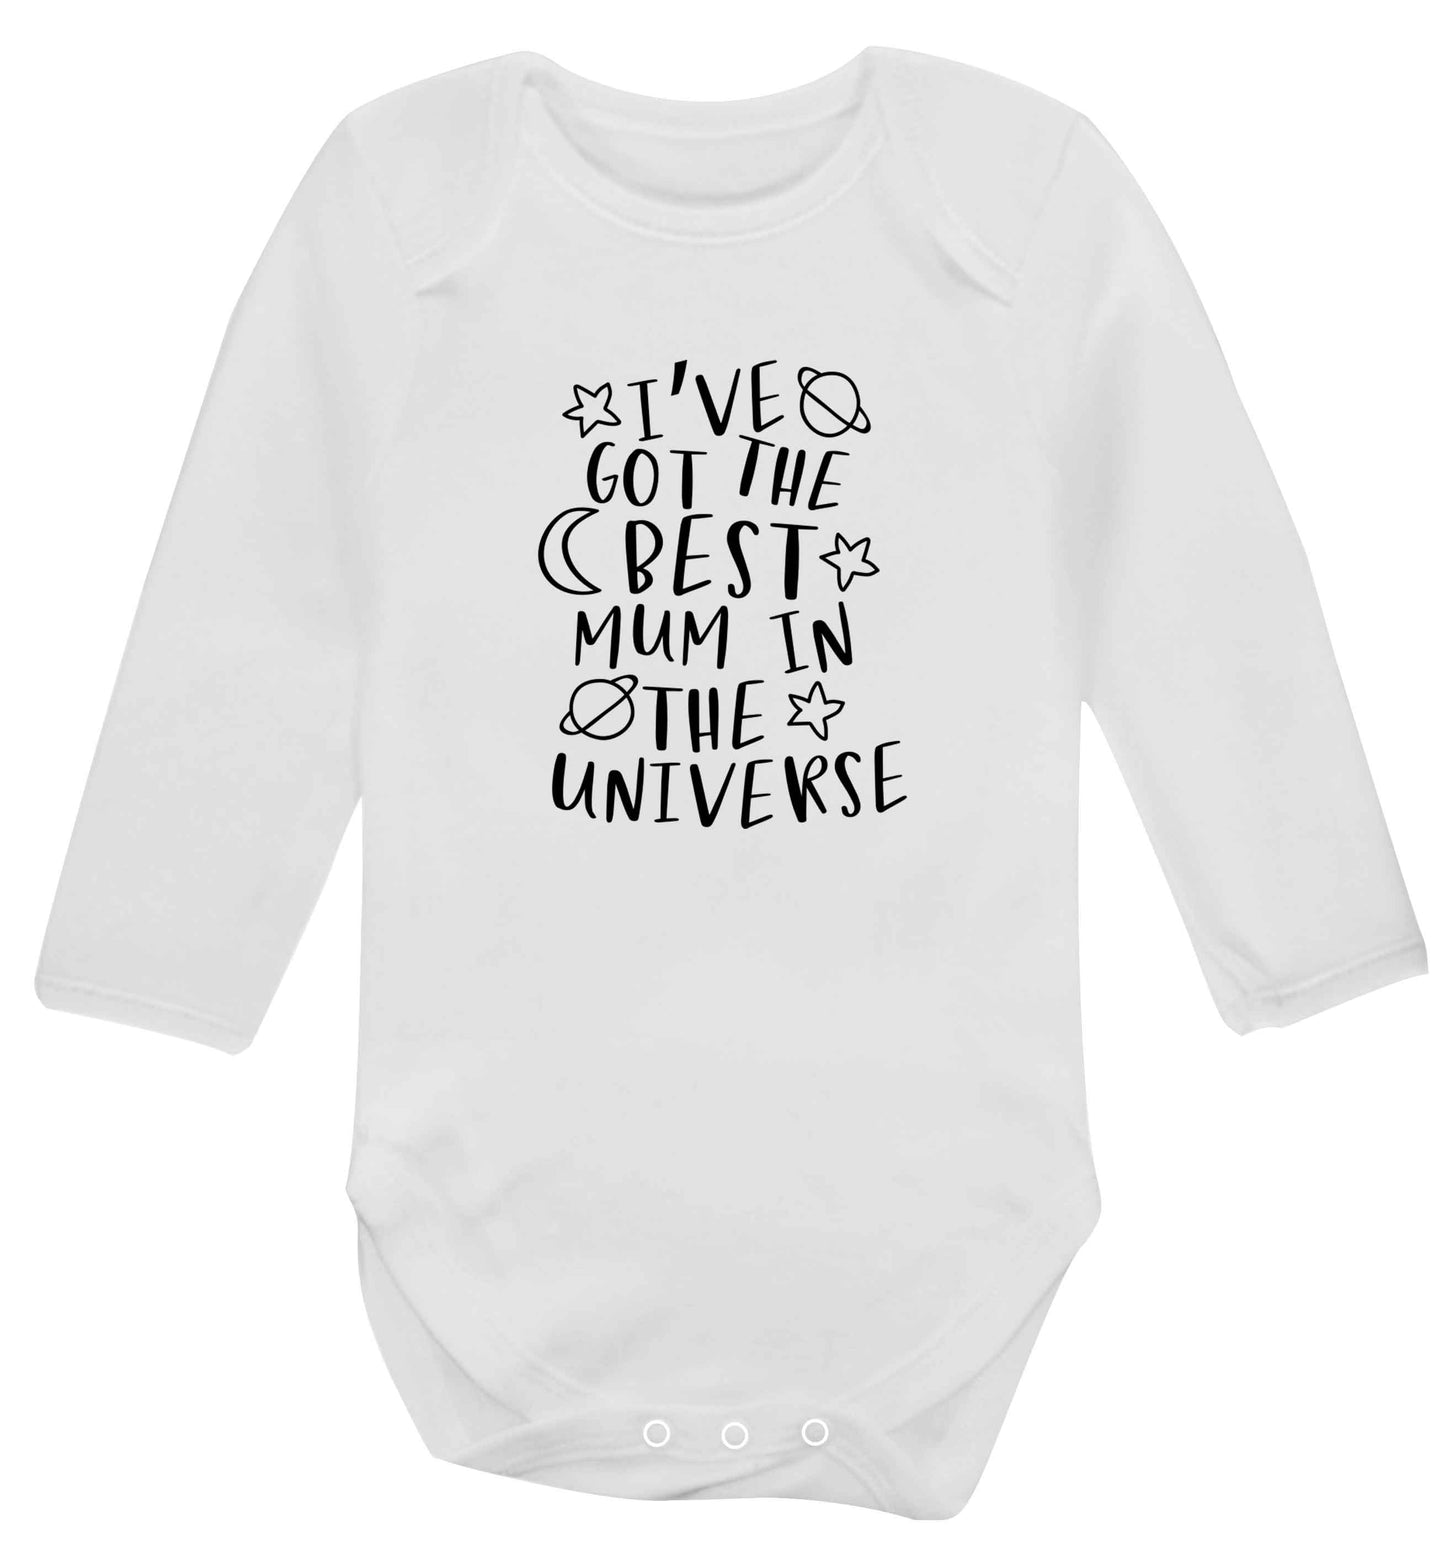 I've got the best mum in the universe baby vest long sleeved white 6-12 months